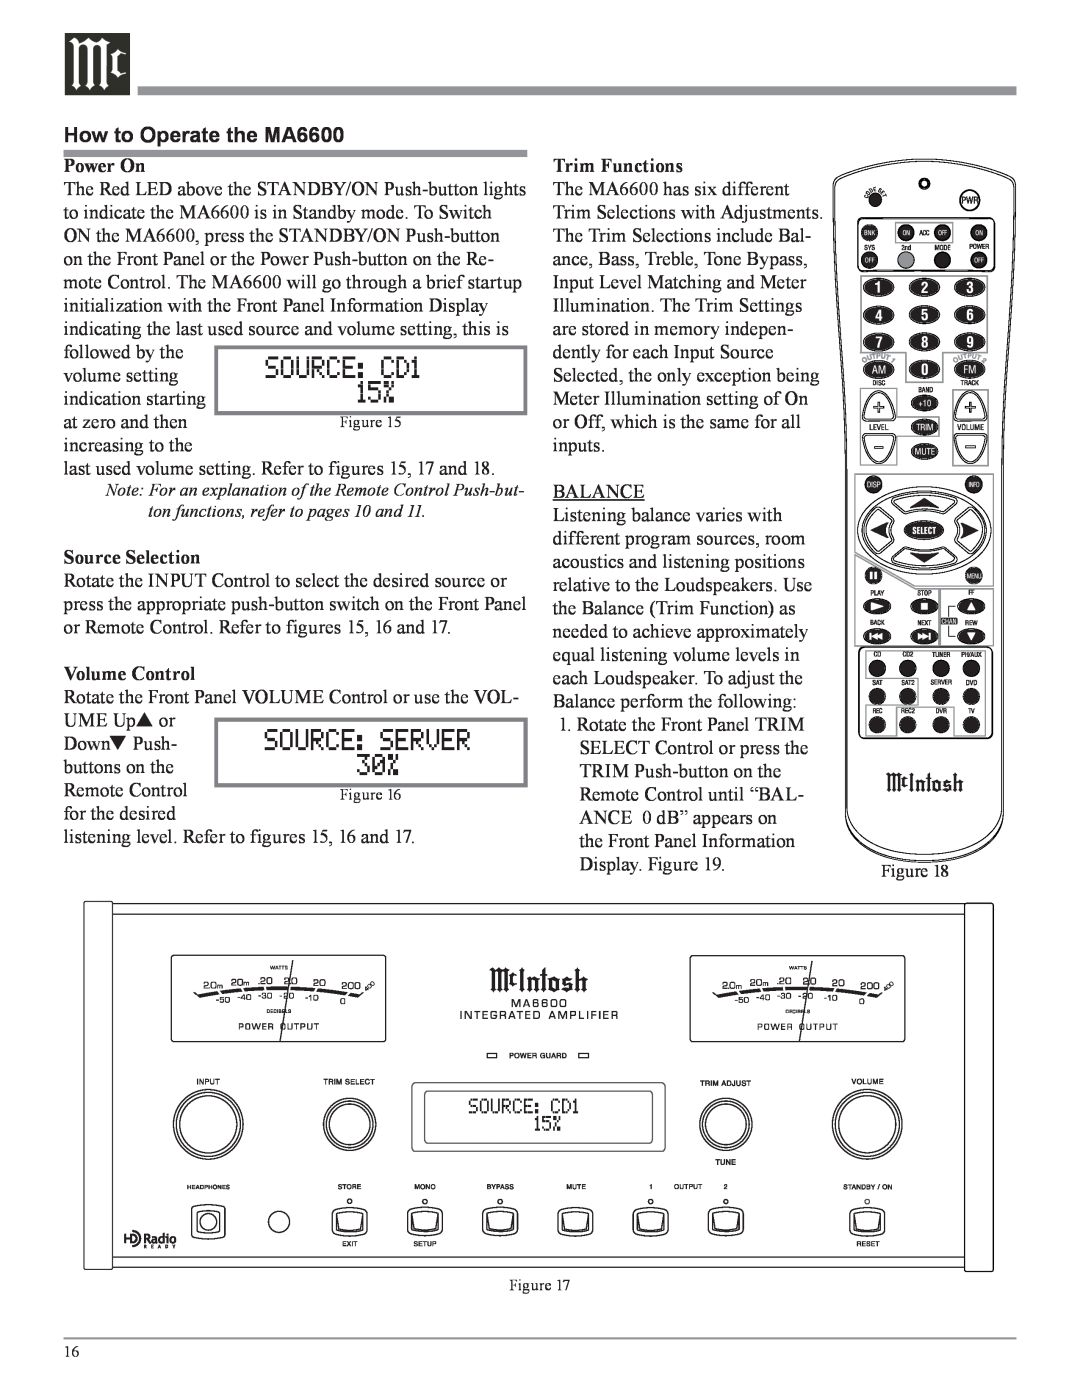 McIntosh owner manual How to Operate the MA6600, Source Server 